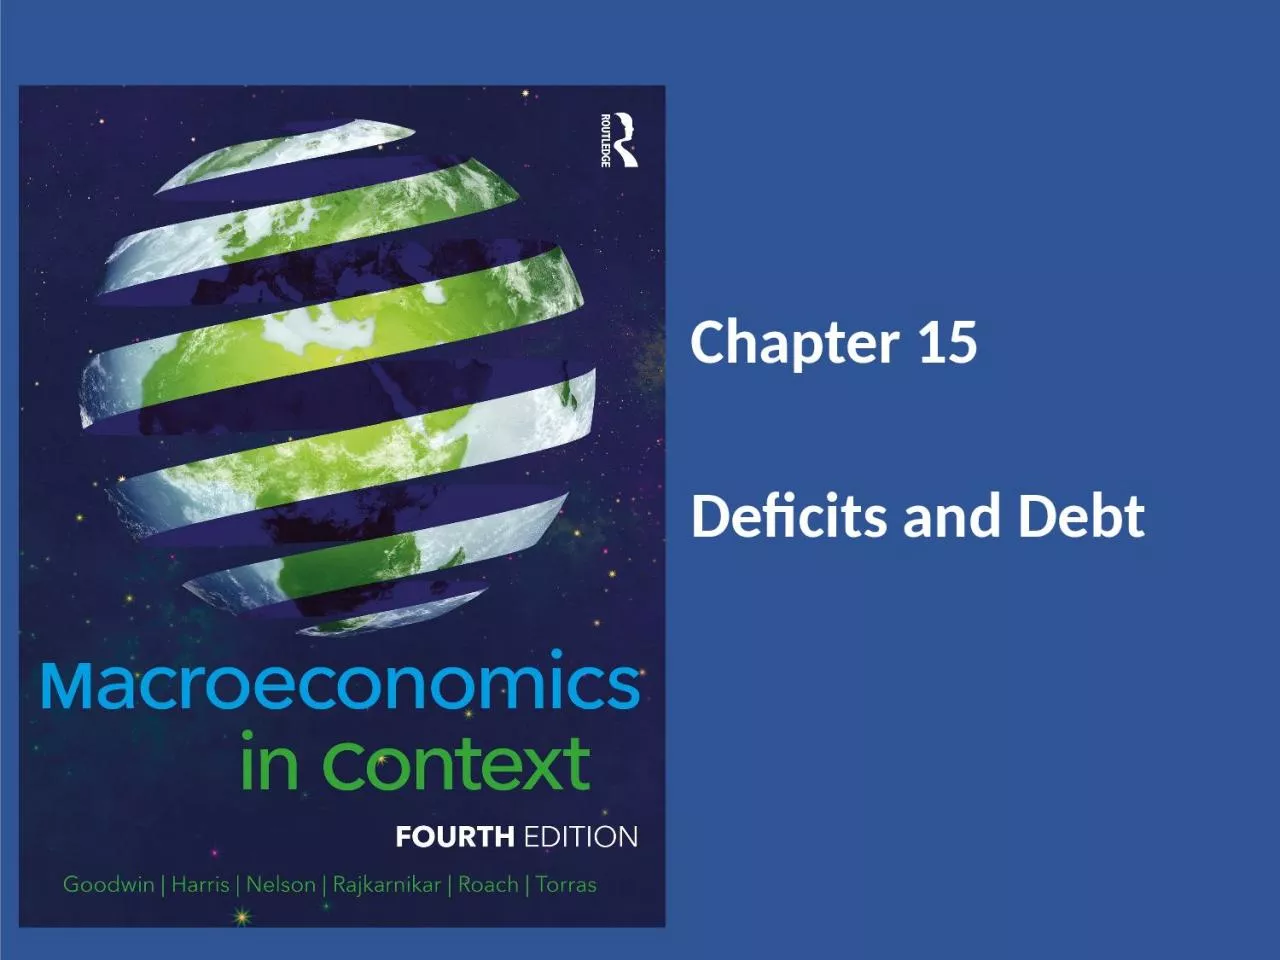 Chapter 15 Deficits and Debt